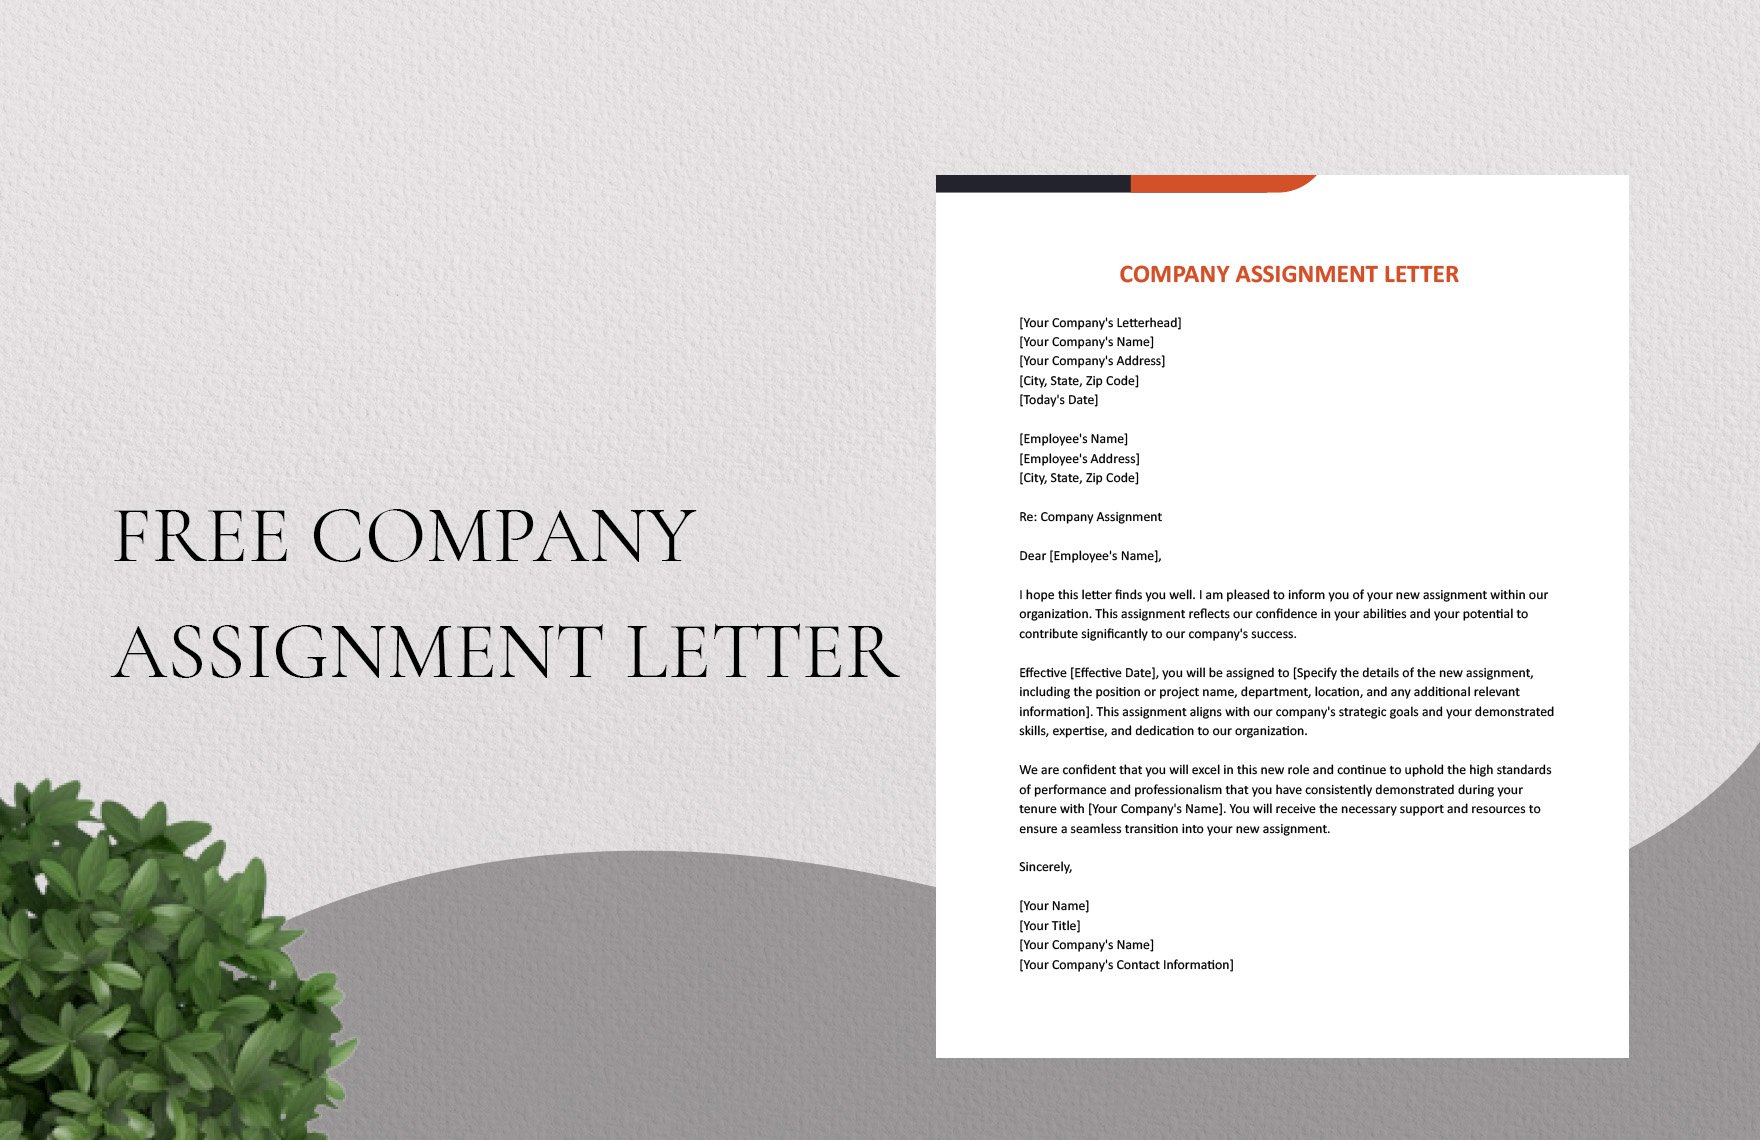 Company Assignment Letter in Word, Google Docs